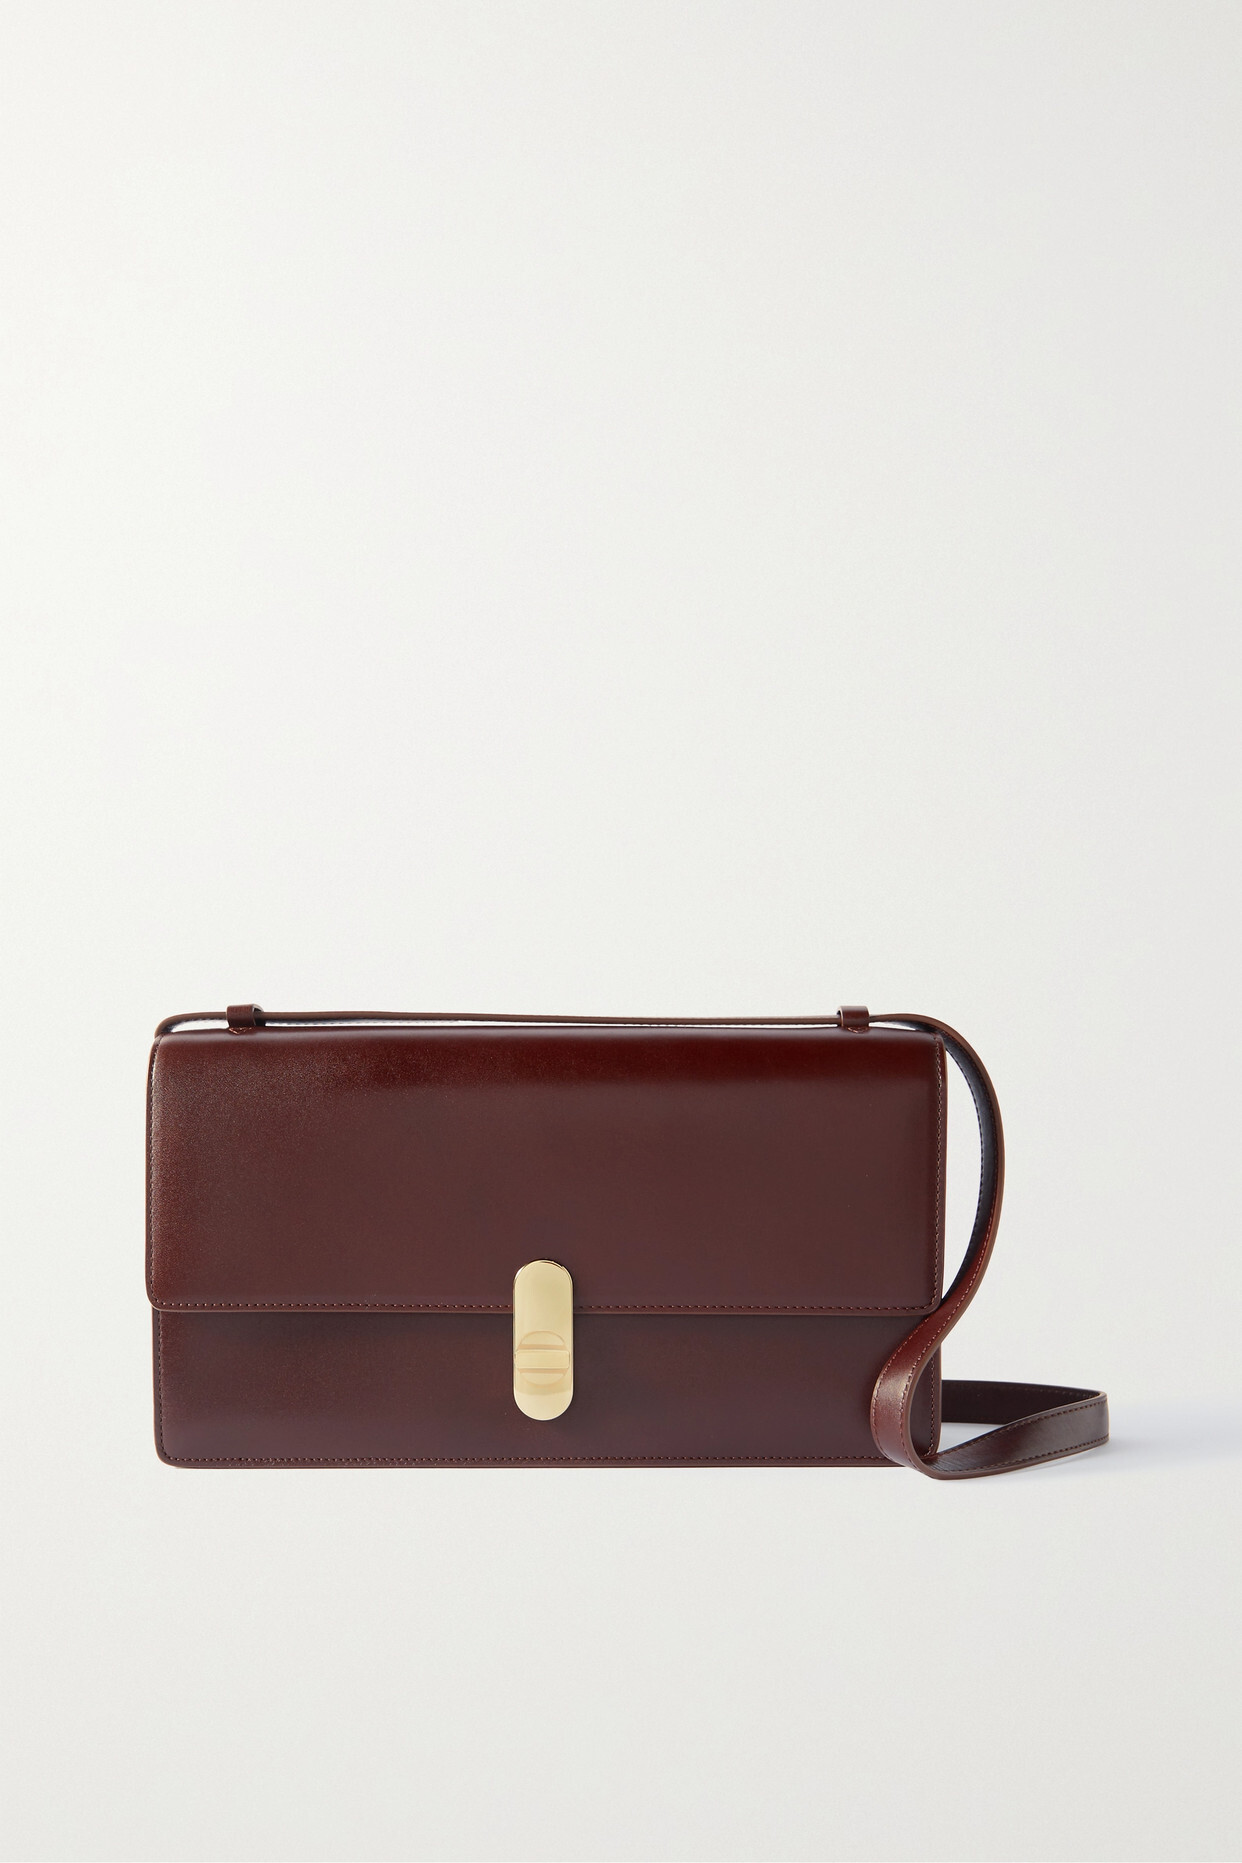 The Row - Clea Leather Shoulder Bag - Brown